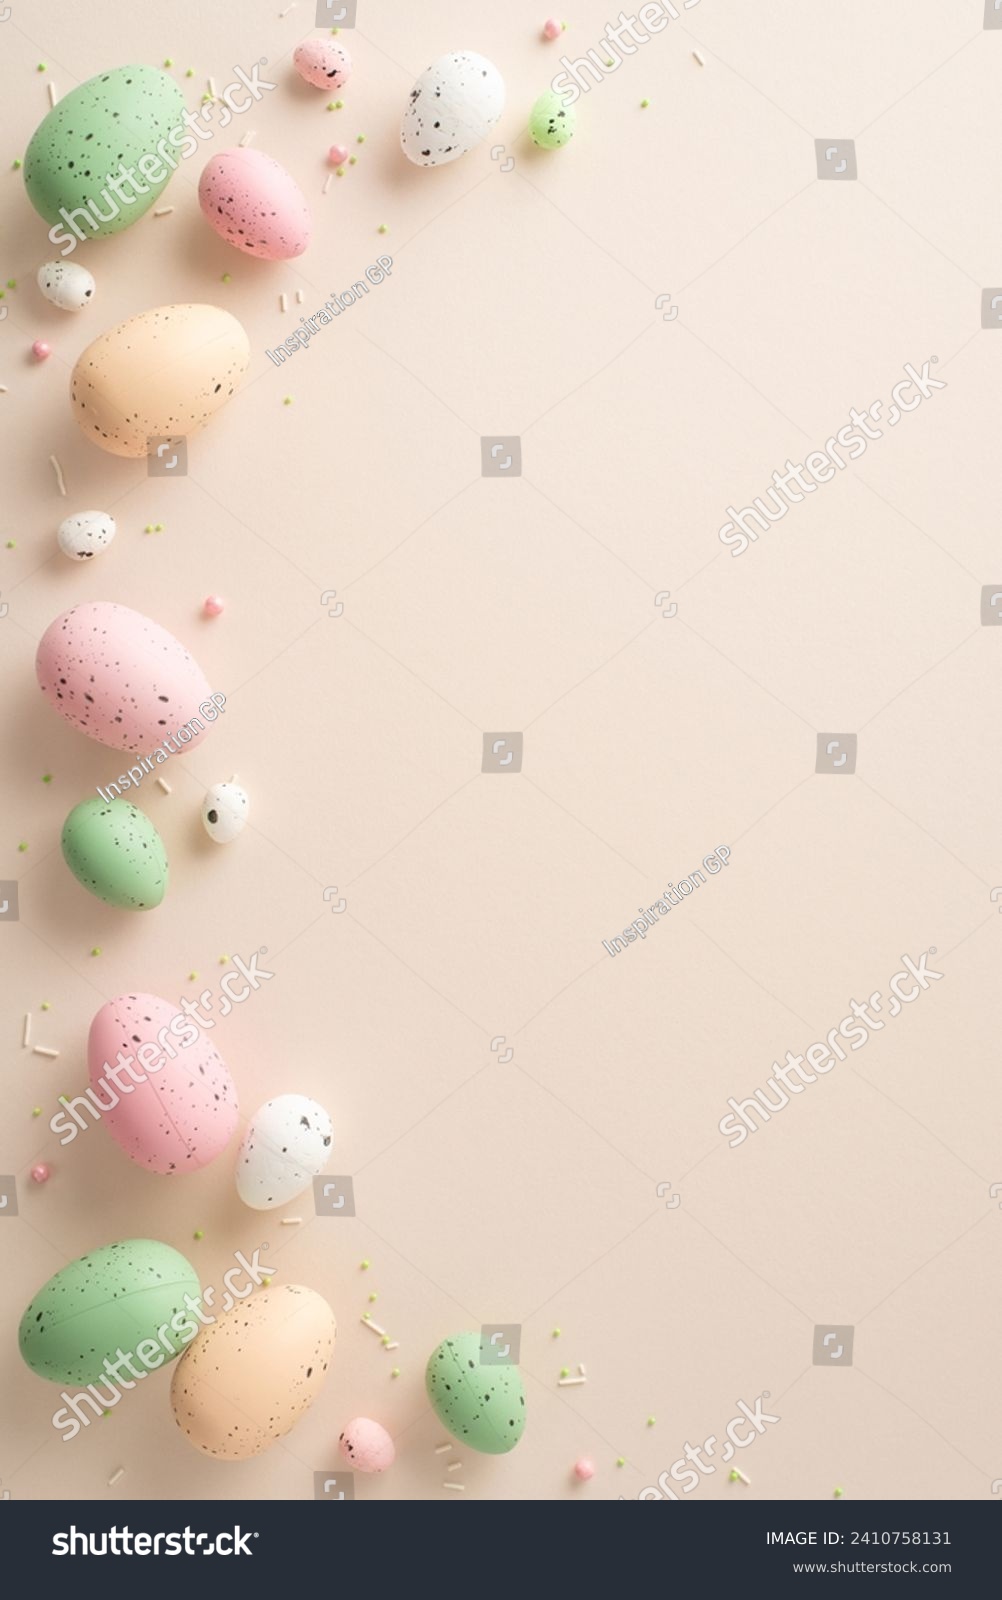 Seasonal Joy Display: Top-view vertical photo showcasing traditional Easter eggs, and scattered colorful sprinkles against a pastel beige backdrop with space for text or ads #2410758131